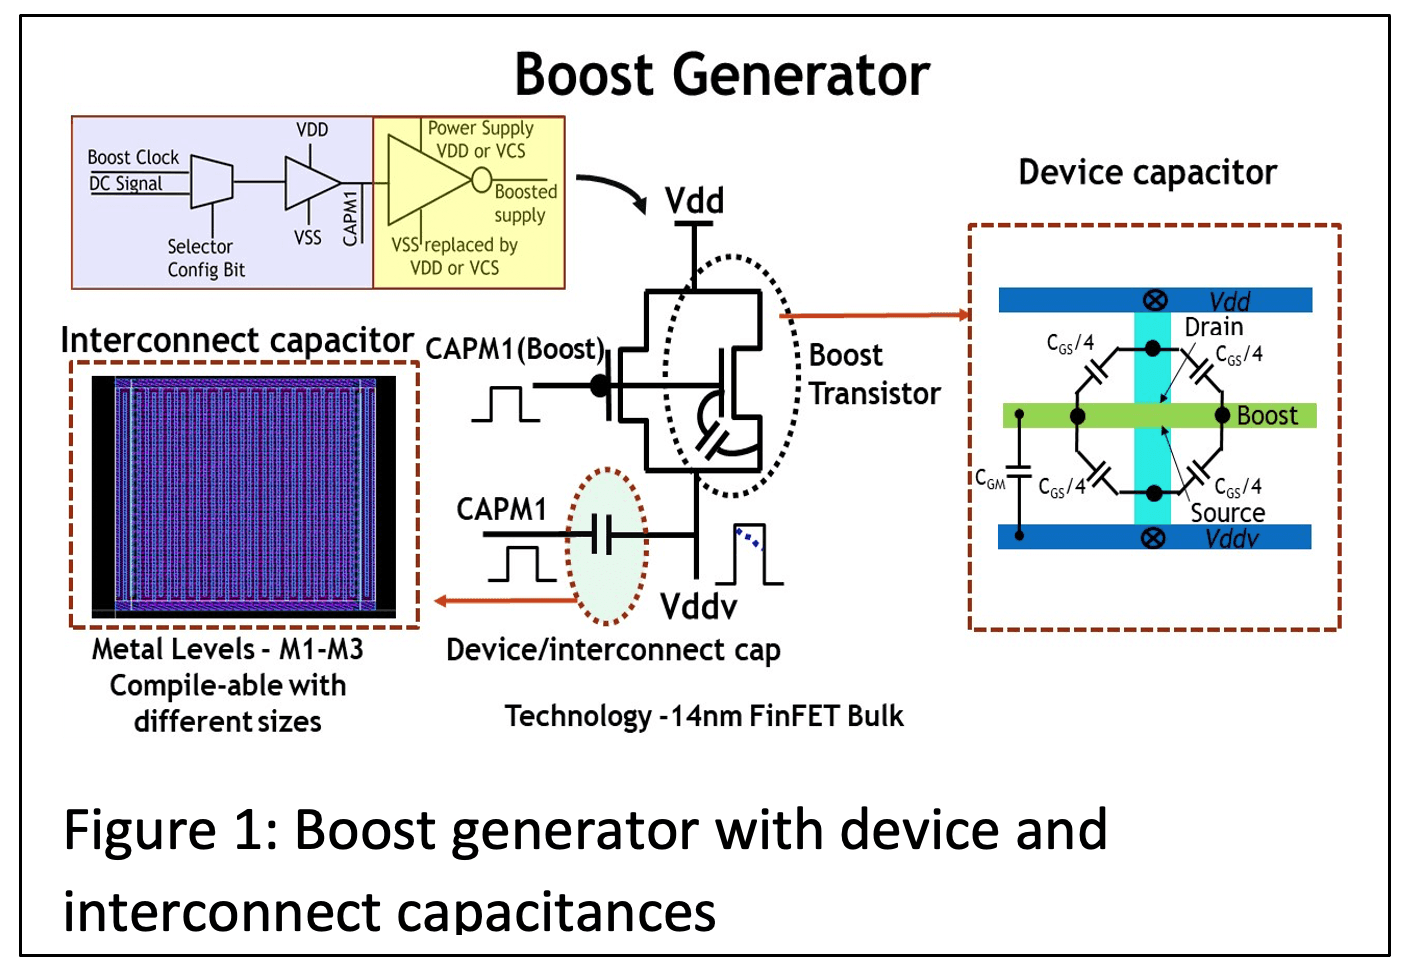 Fig 1. Boost generator with device and interconnect capacitances.